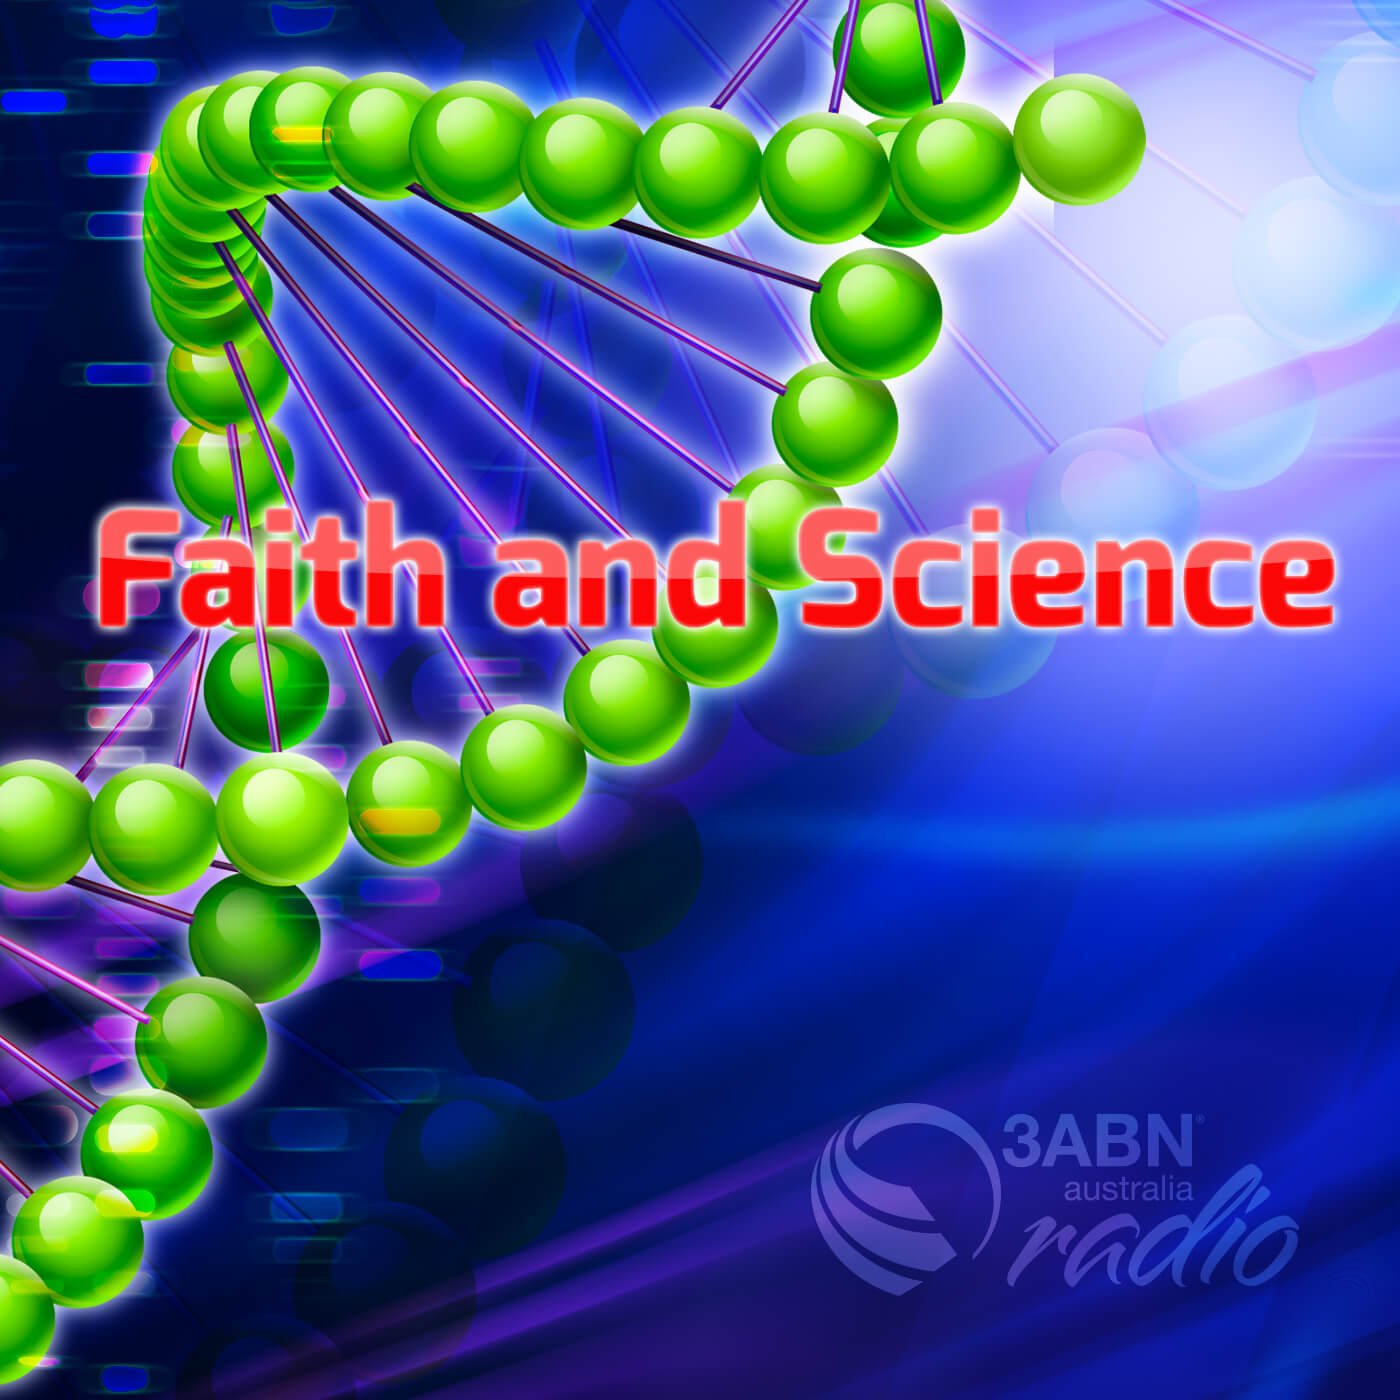 Gardens of Well-Being - Bridging the Bible and Scientific Discoveries - 2405